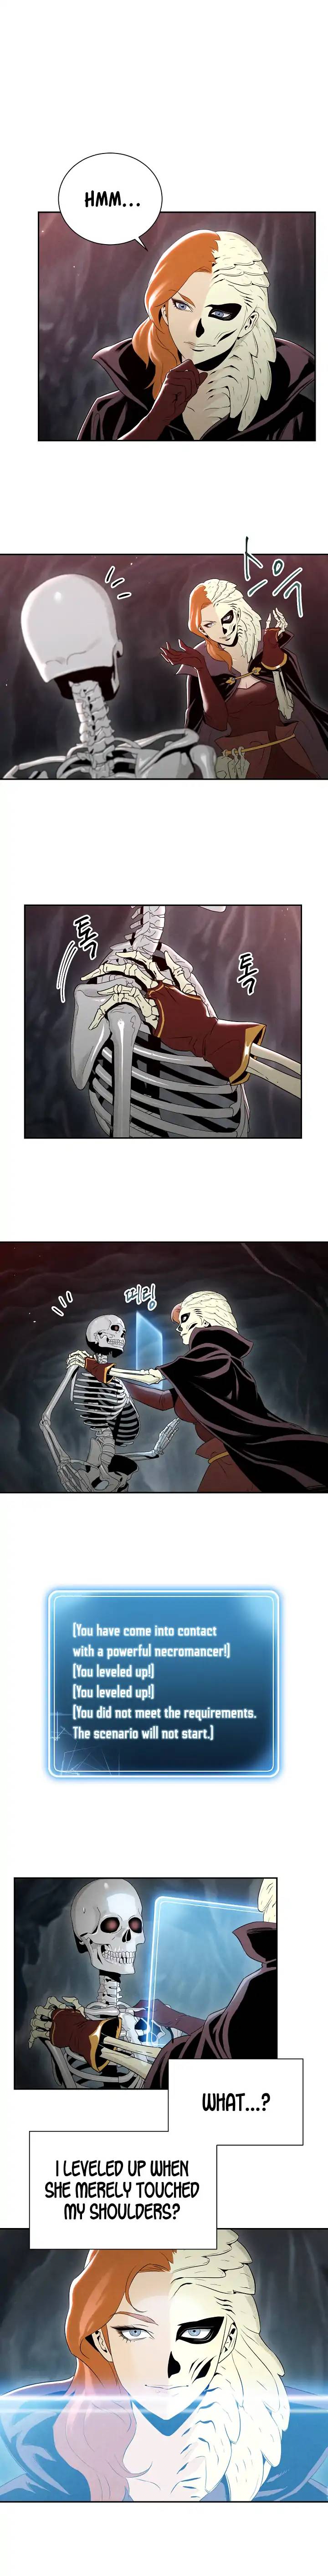 Skeleton Soldier Couldnt Protect The Dungeon 49 2